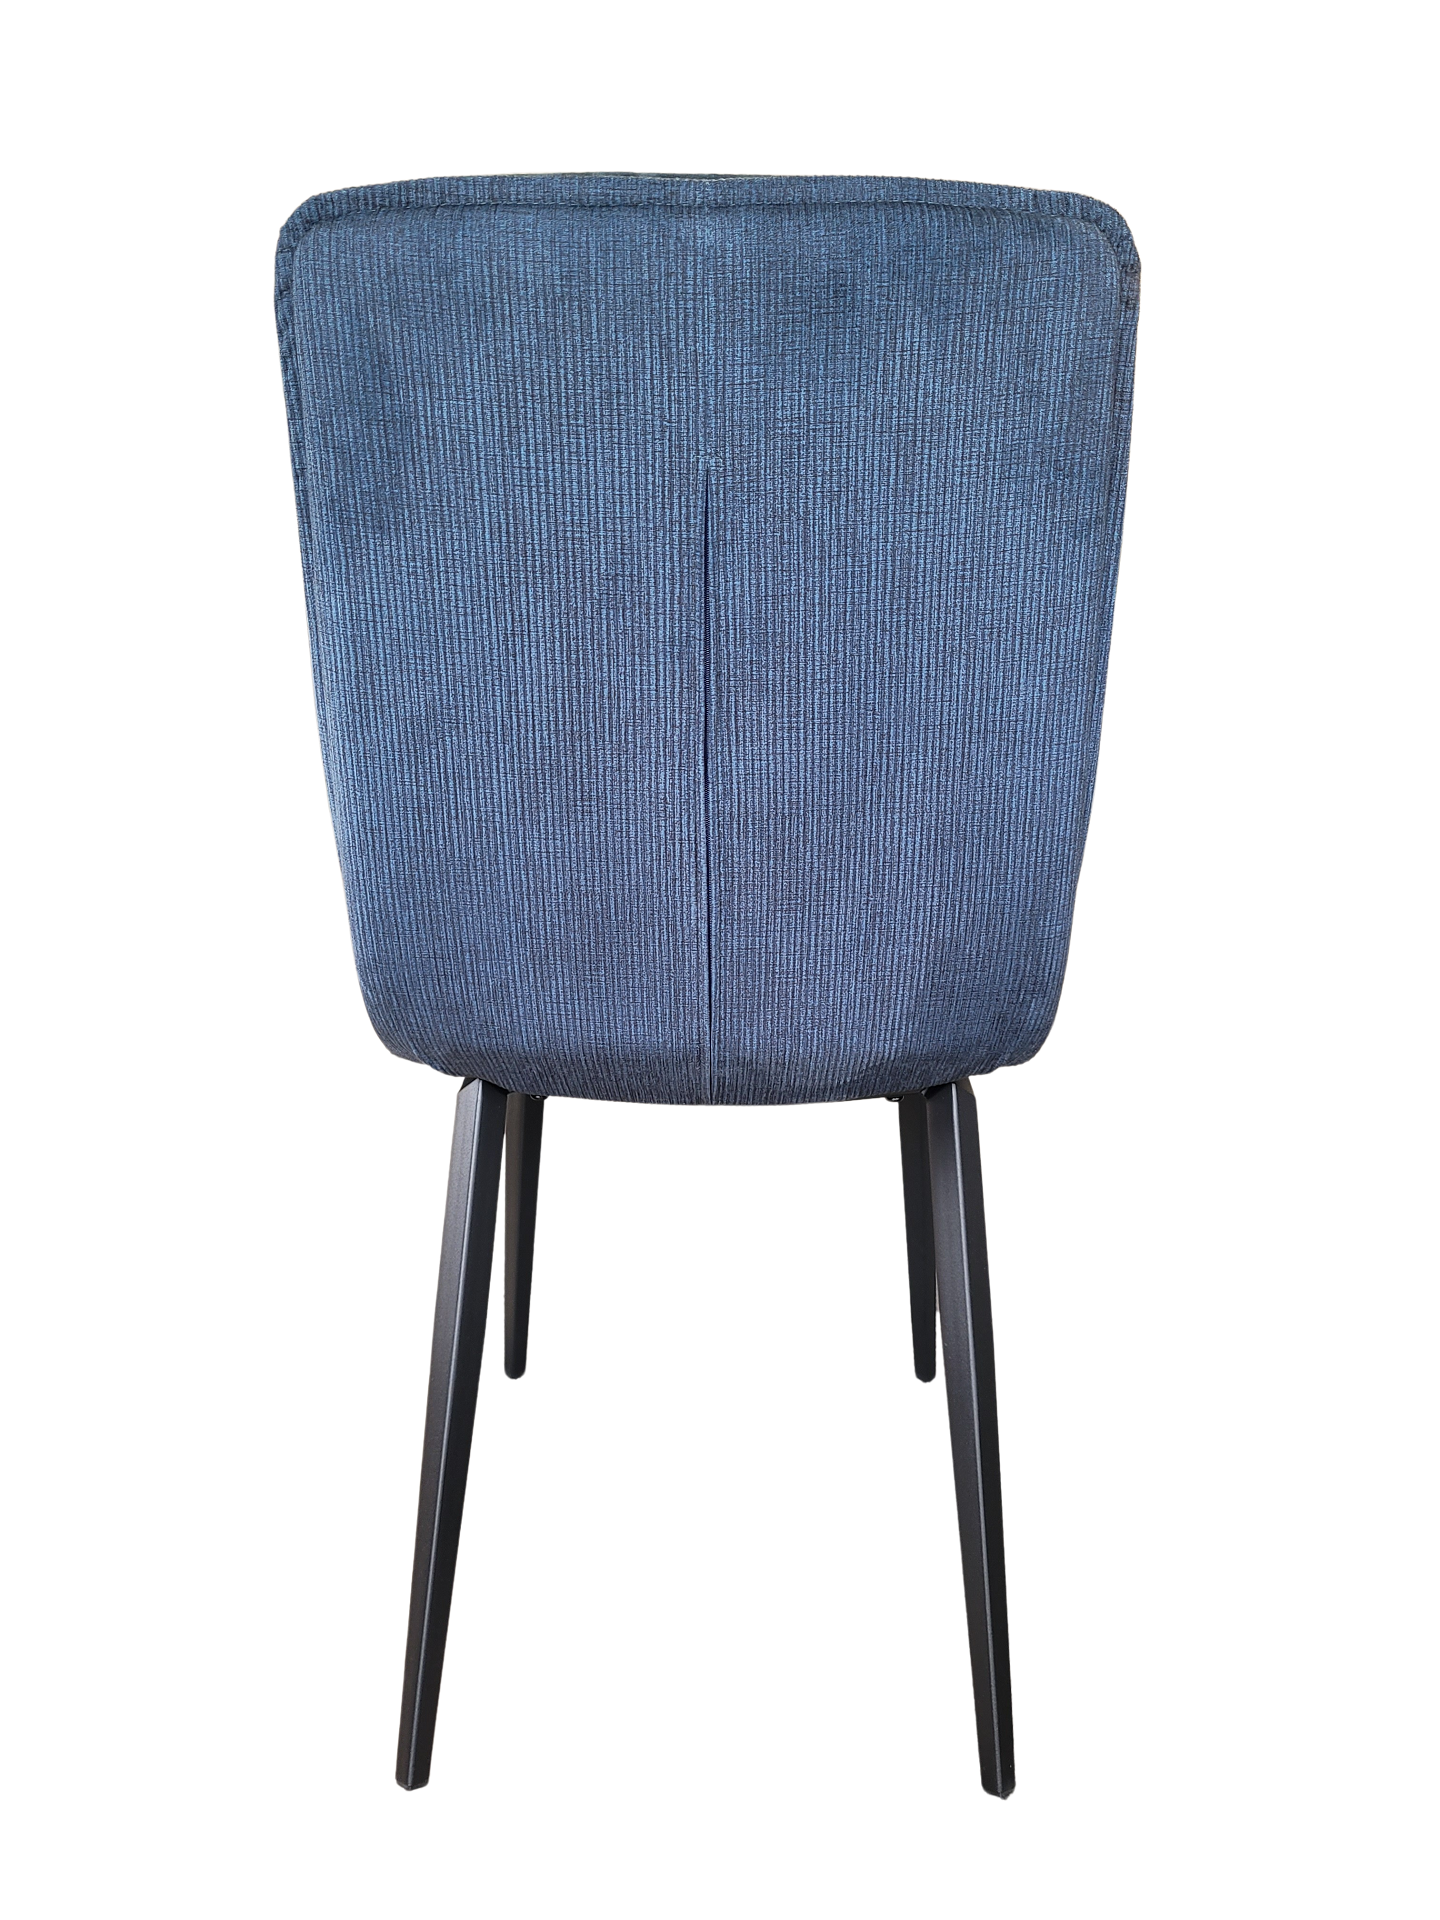 Jimmy Dining Chair Teal